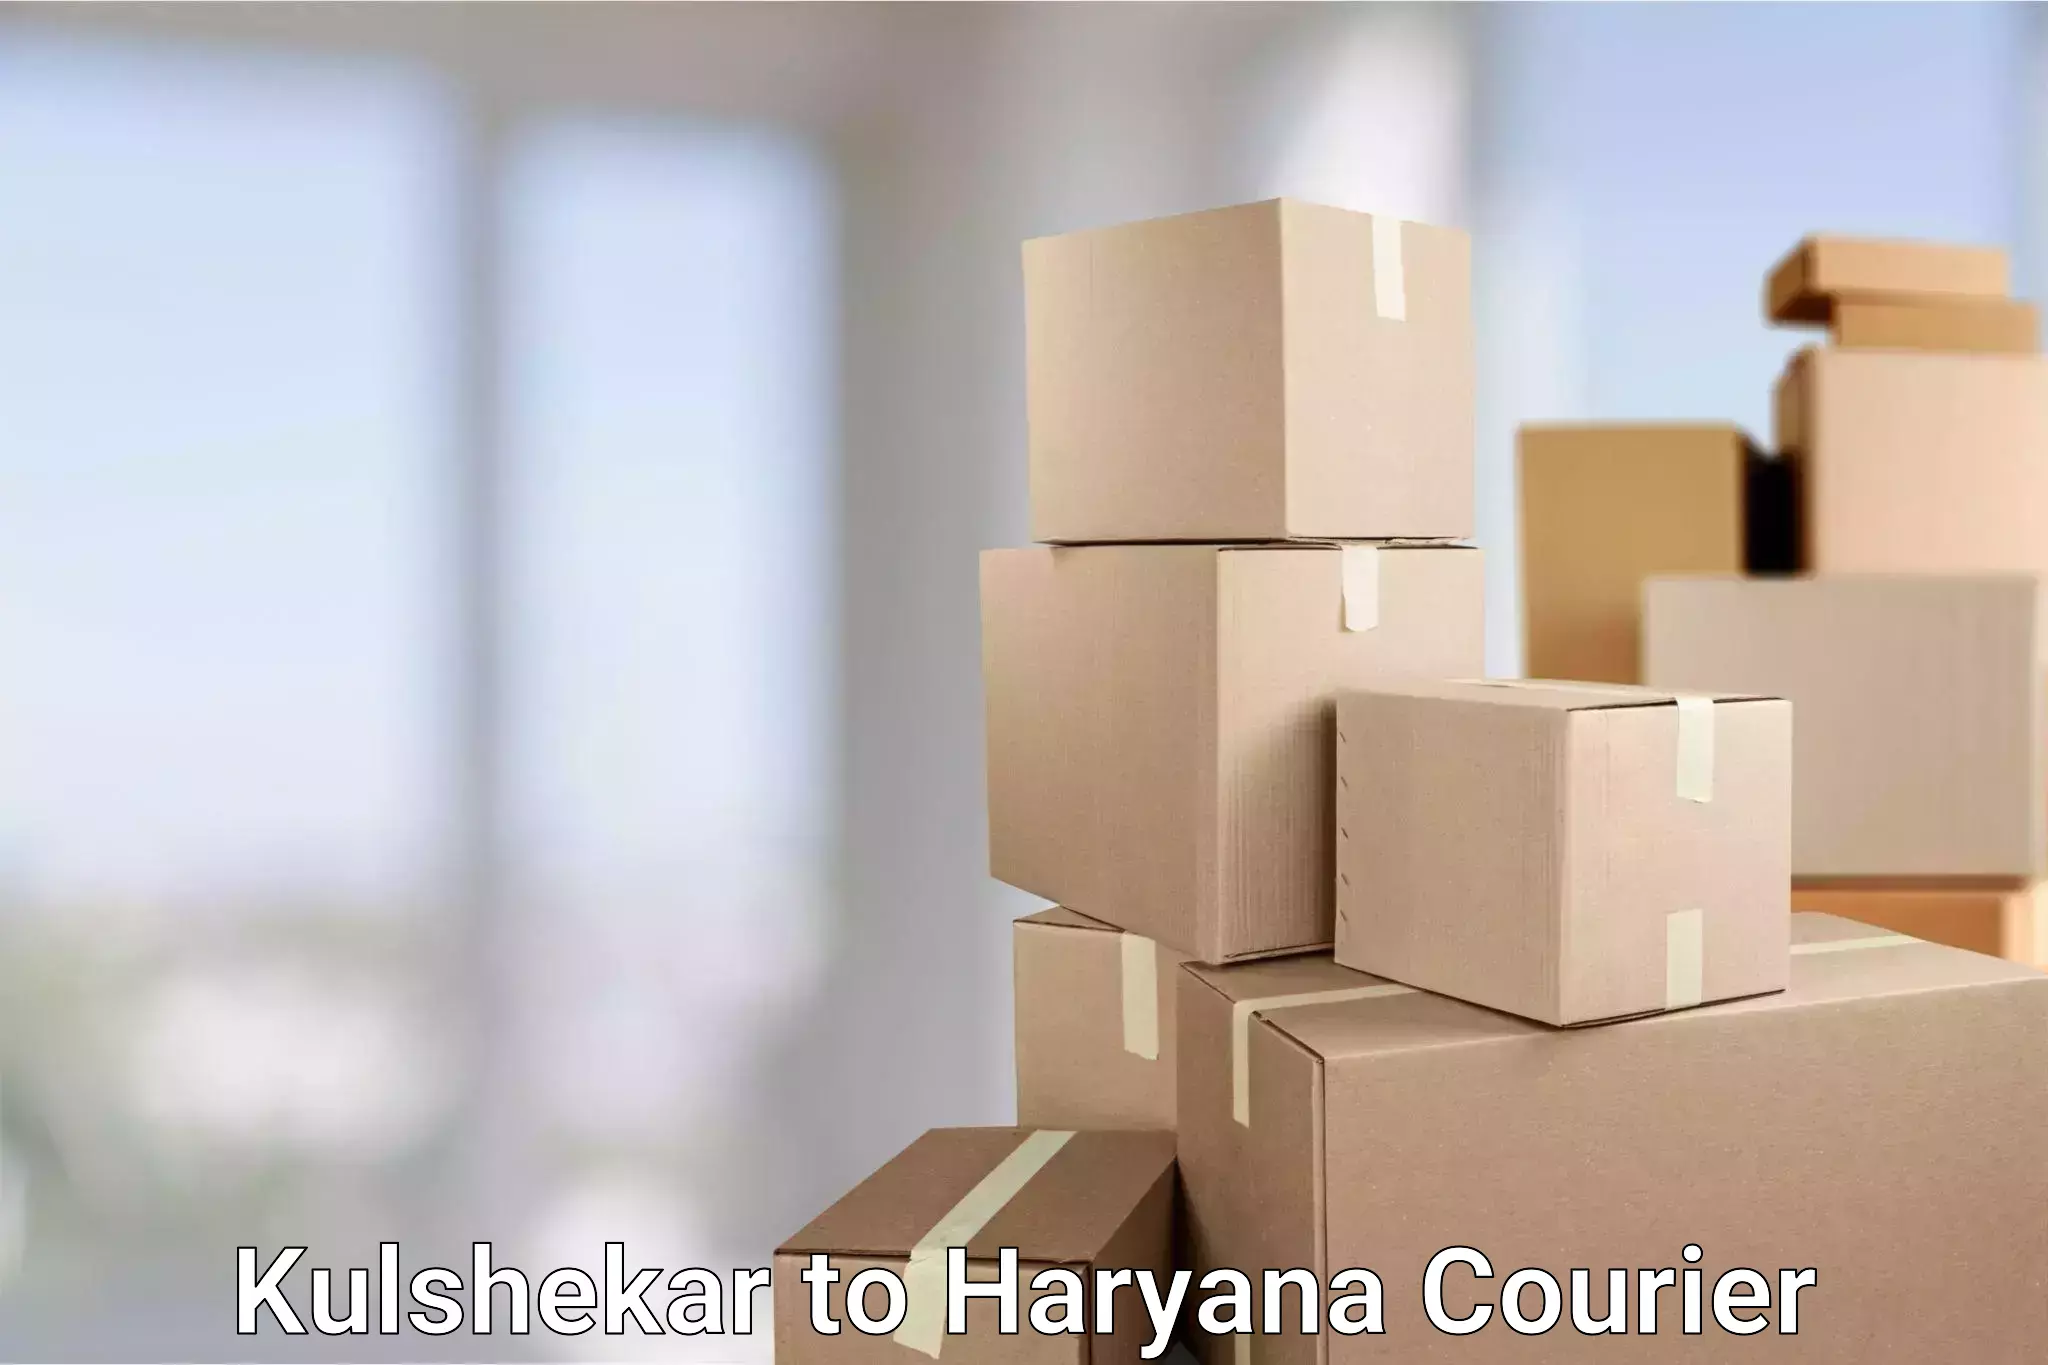 State-of-the-art courier technology Kulshekar to Sonipat